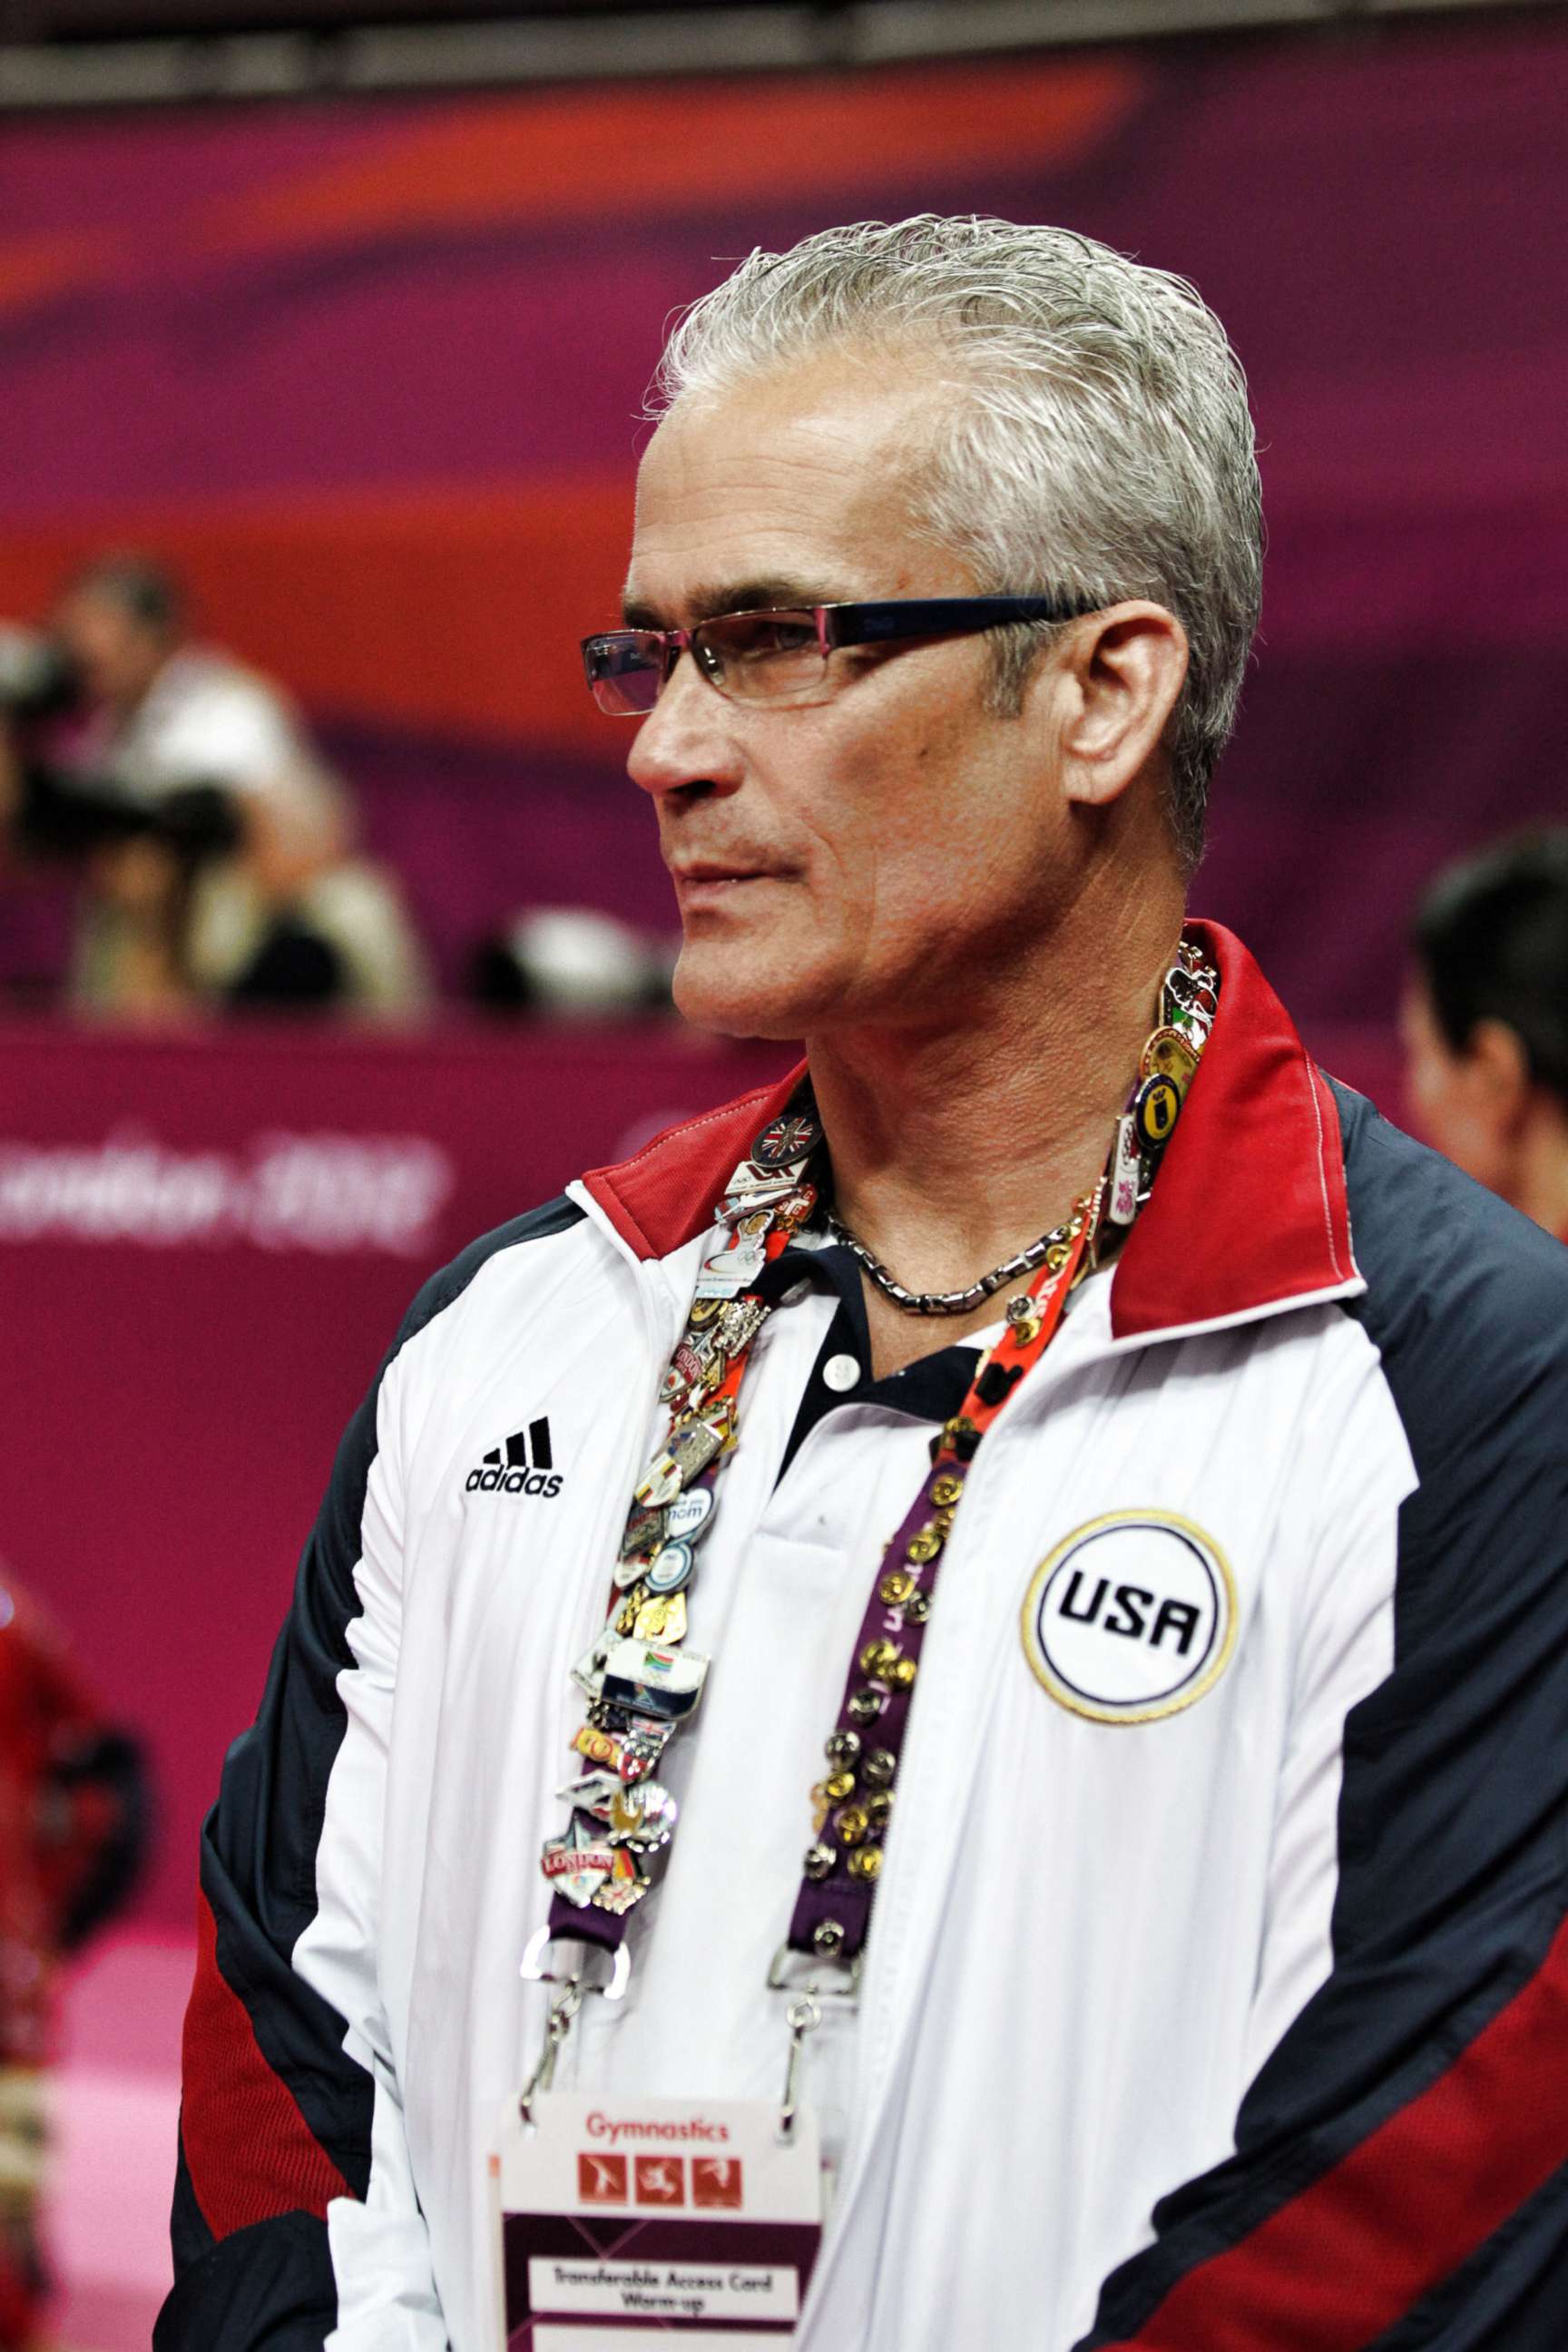 PHOTO: In this July 31, 2012, file photo, John Geddert, coach of the US women's gymnastics team, is shown during the Women's Team Gymnastics competition at the 2012 Olympics in London.